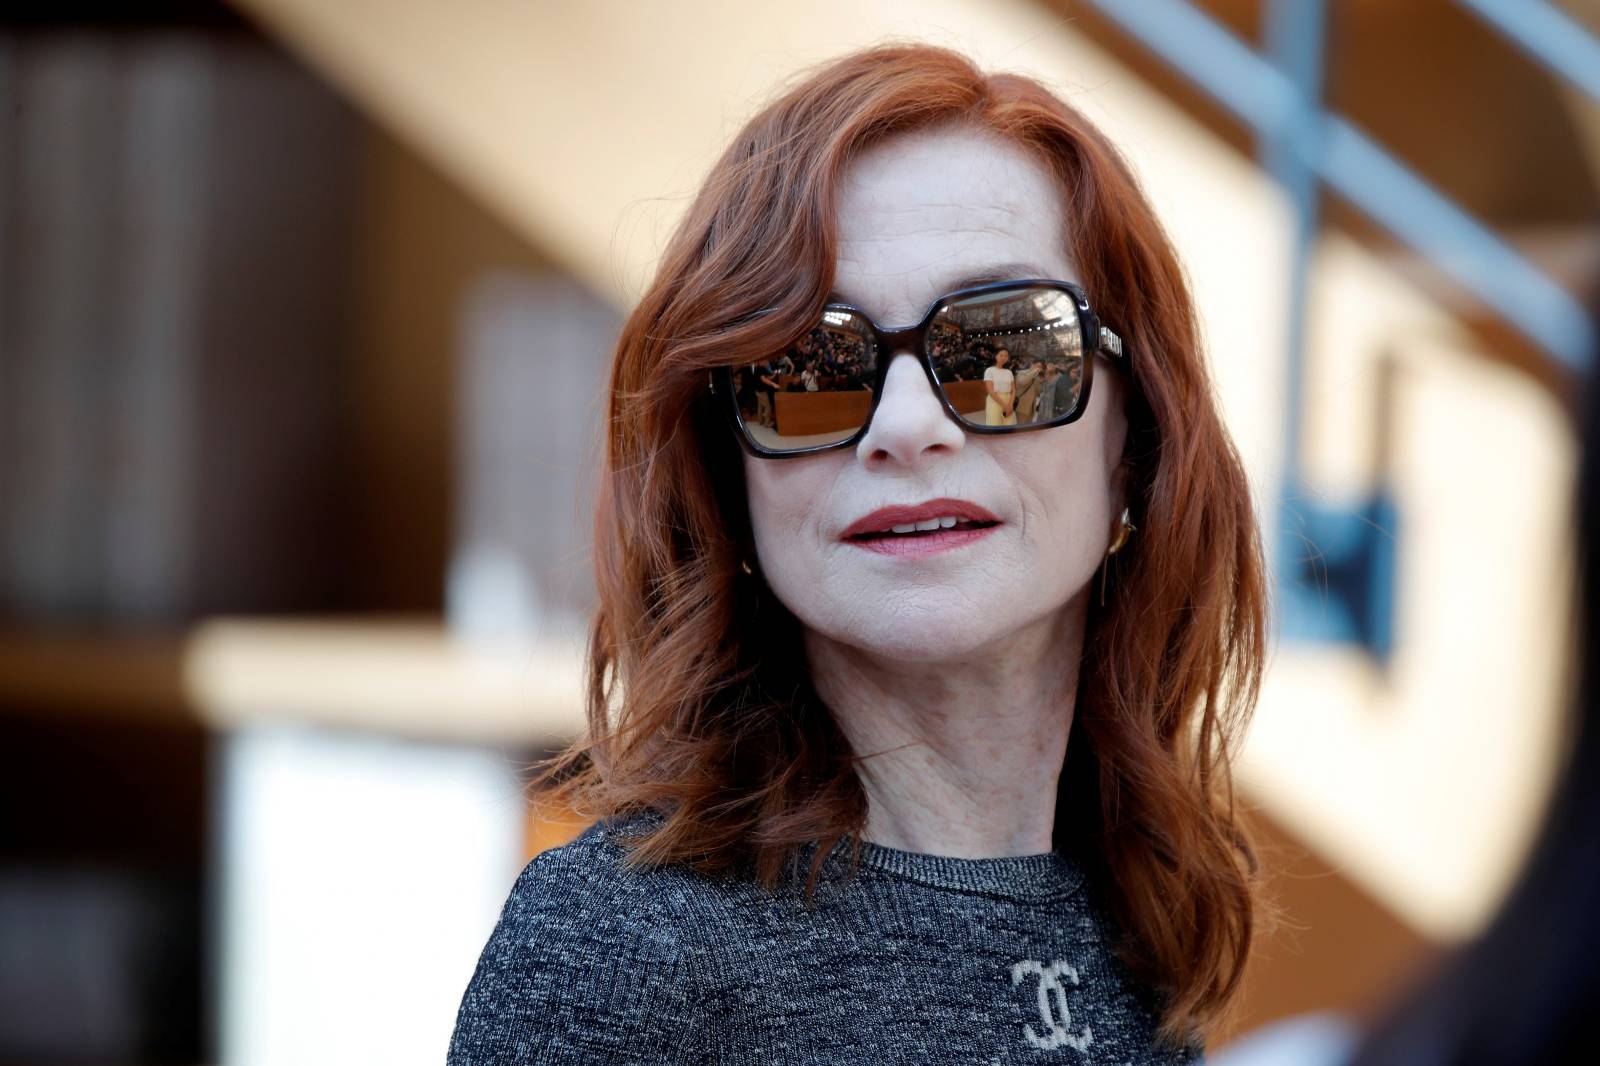 Isabelle Huppert arrives to attend the Chanel Haute Couture Fall/Winter 2019/20 collection show in Paris